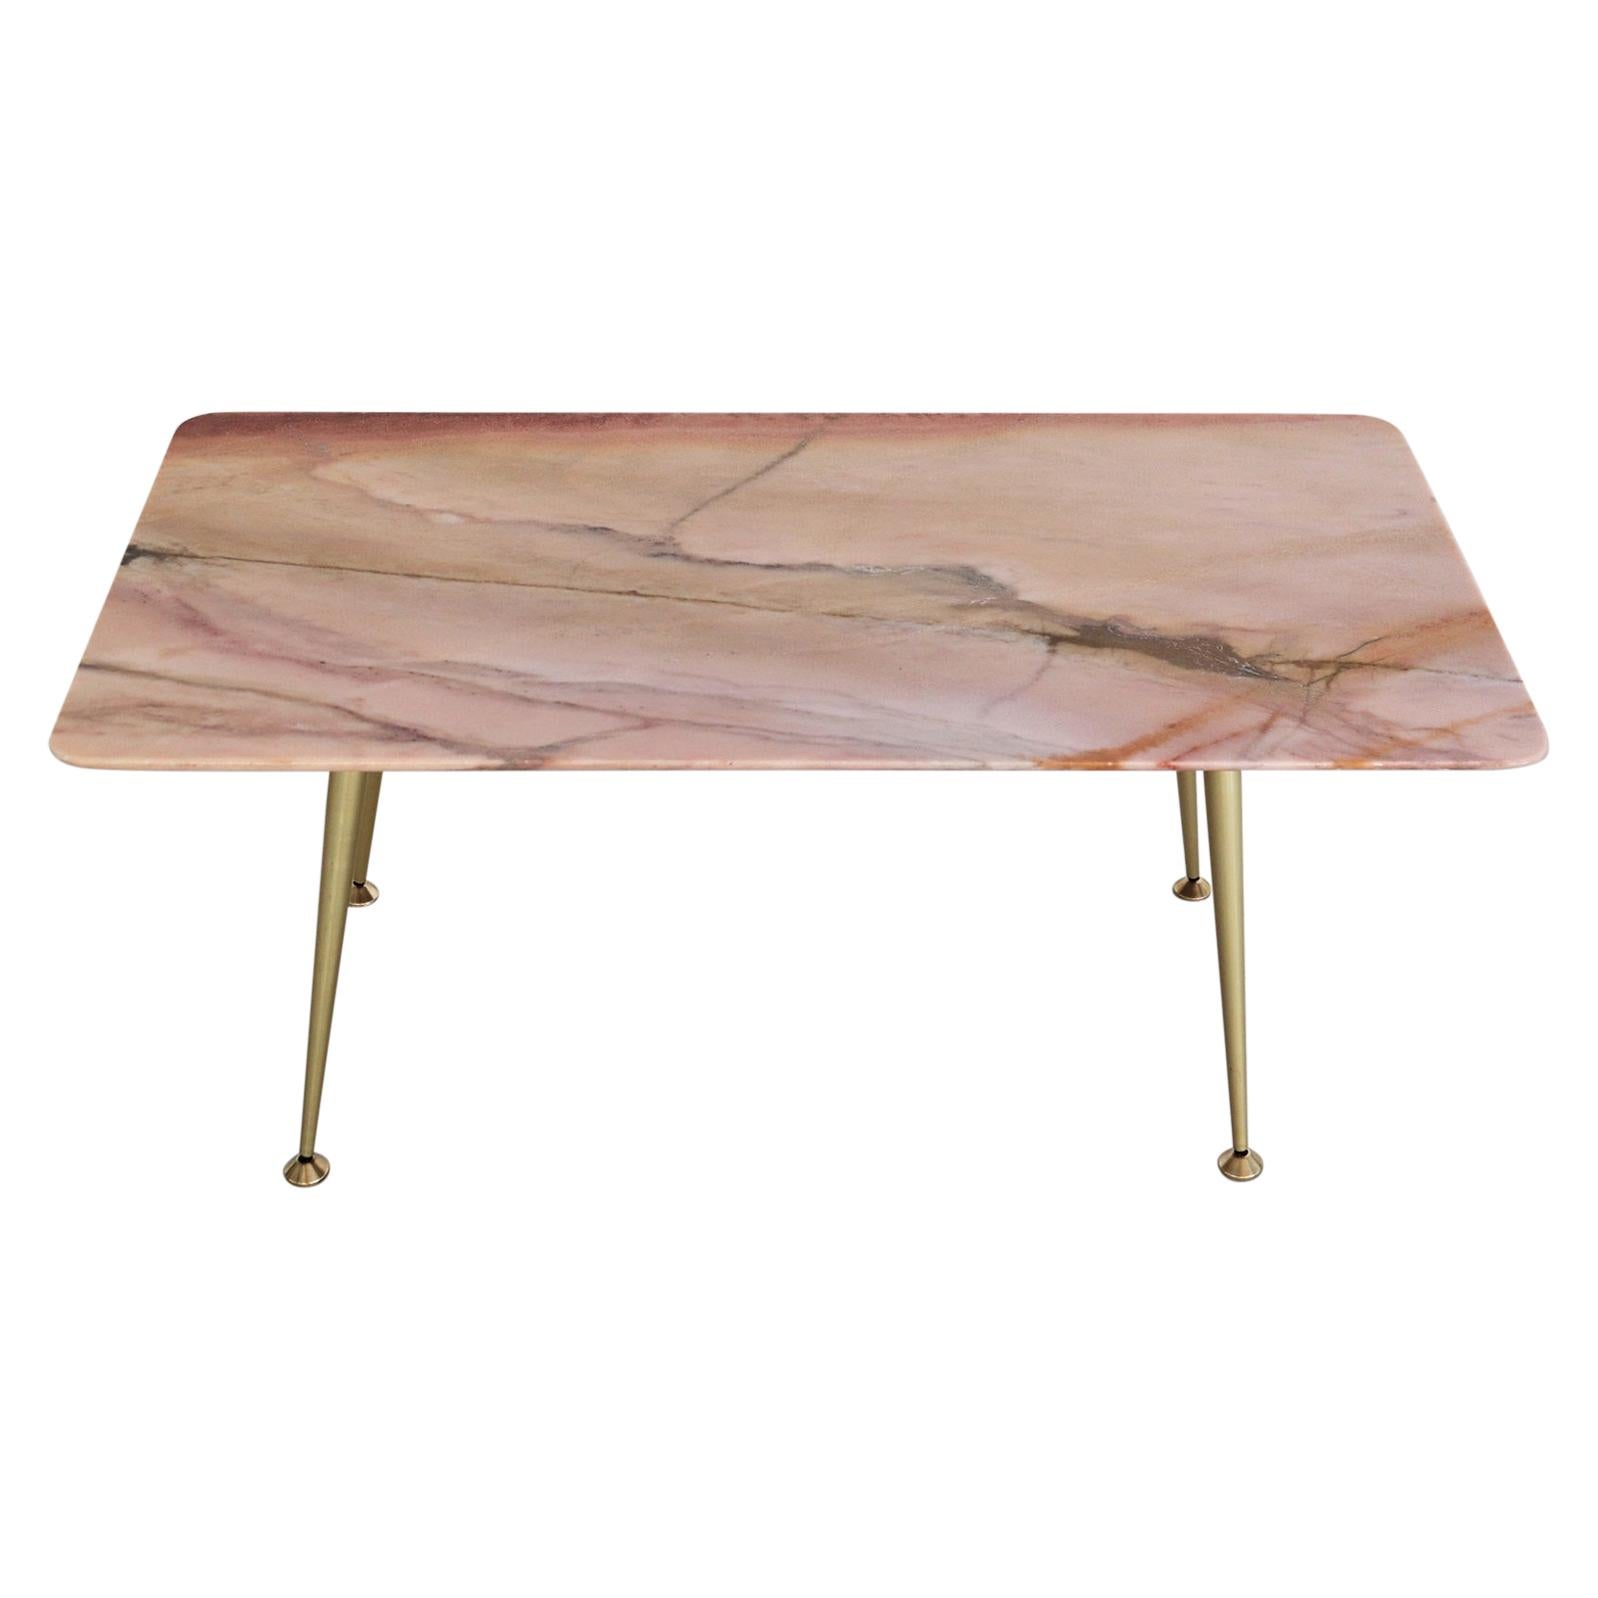 Italian Midcentury Coffee Table with Pink Marble Top and Brass Tips, 1950s